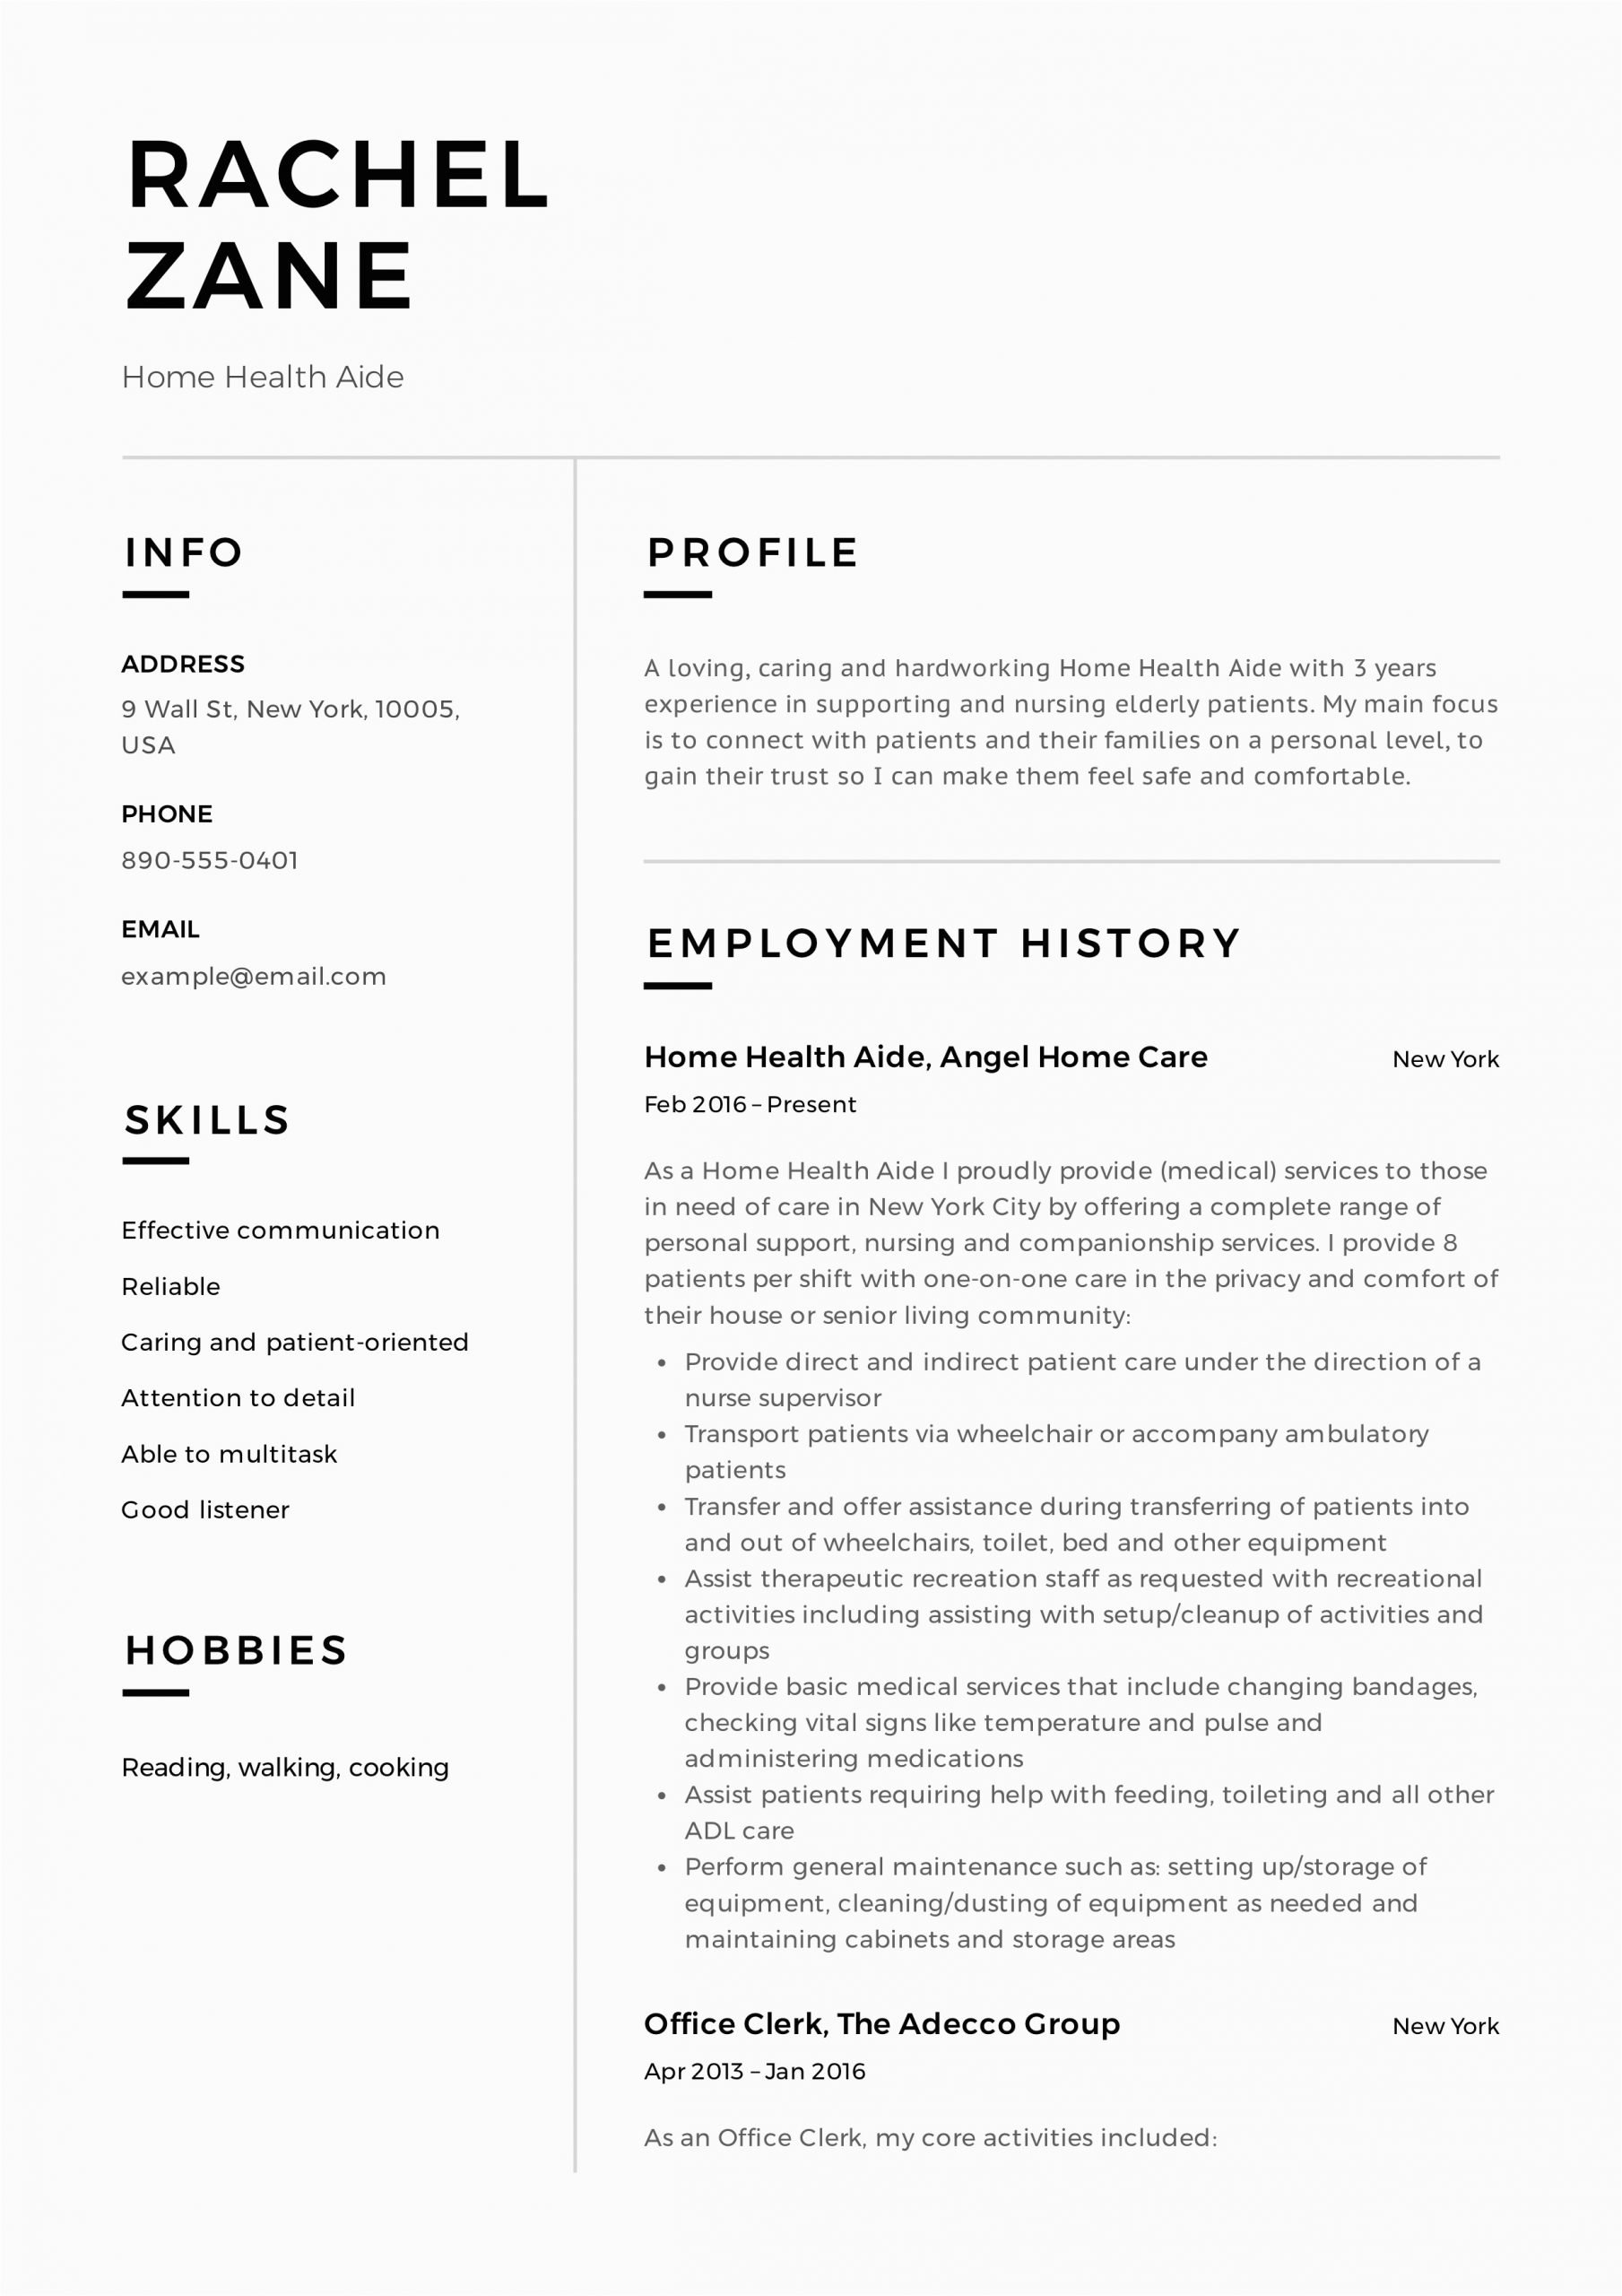 Sample Resume for Health Care Aide Job Home Health Aide Resume Sample & Writing Guide